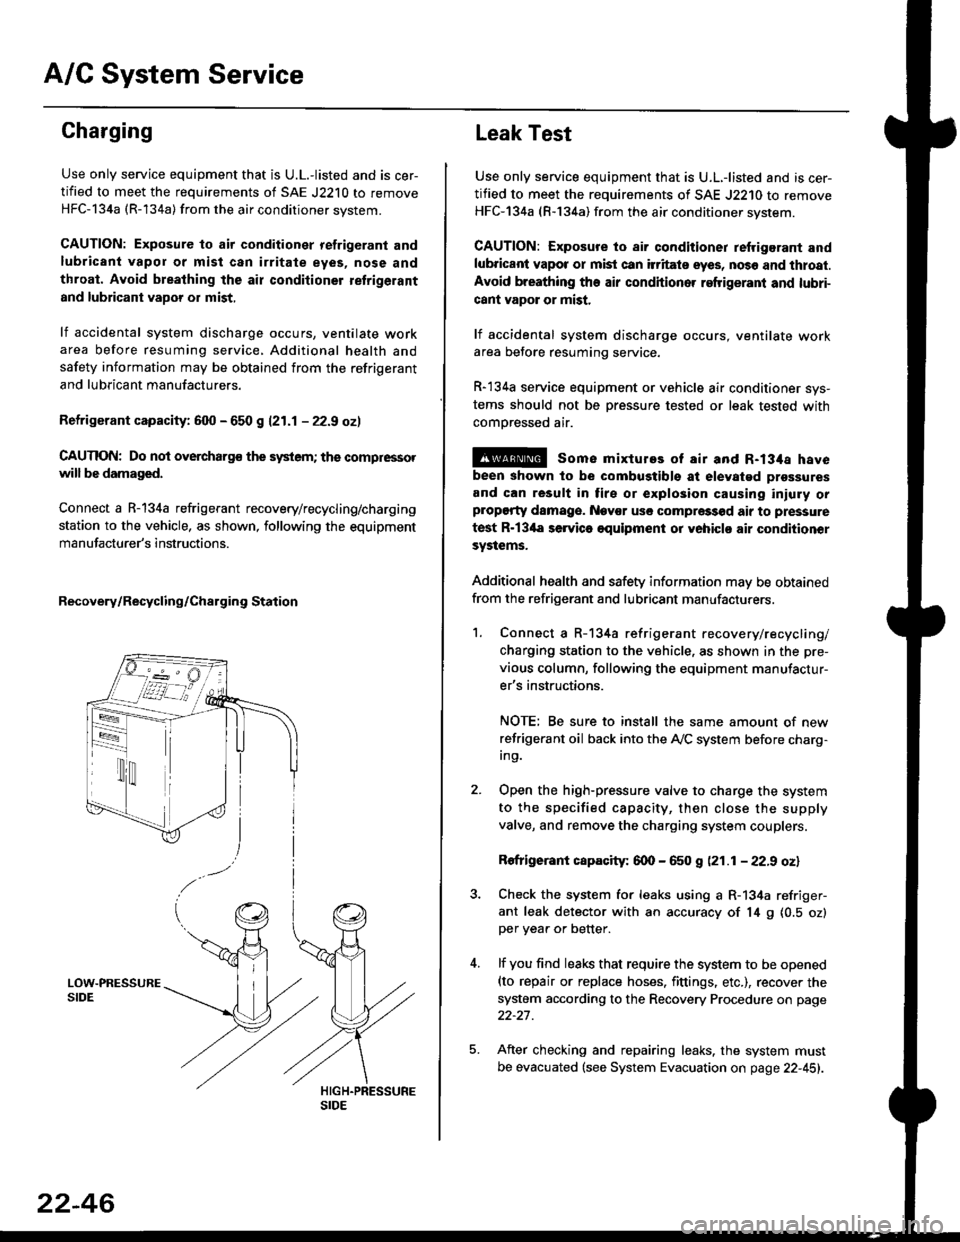 HONDA CIVIC 1998 6.G Workshop Manual A/C System Service
Charging
Use only service equipment that is U.L.-listed and is cer-
tified to meet the requirements of SAE J2210 to remove
HFC-134a (R-134a) from the air conditioner system.
CAUTION